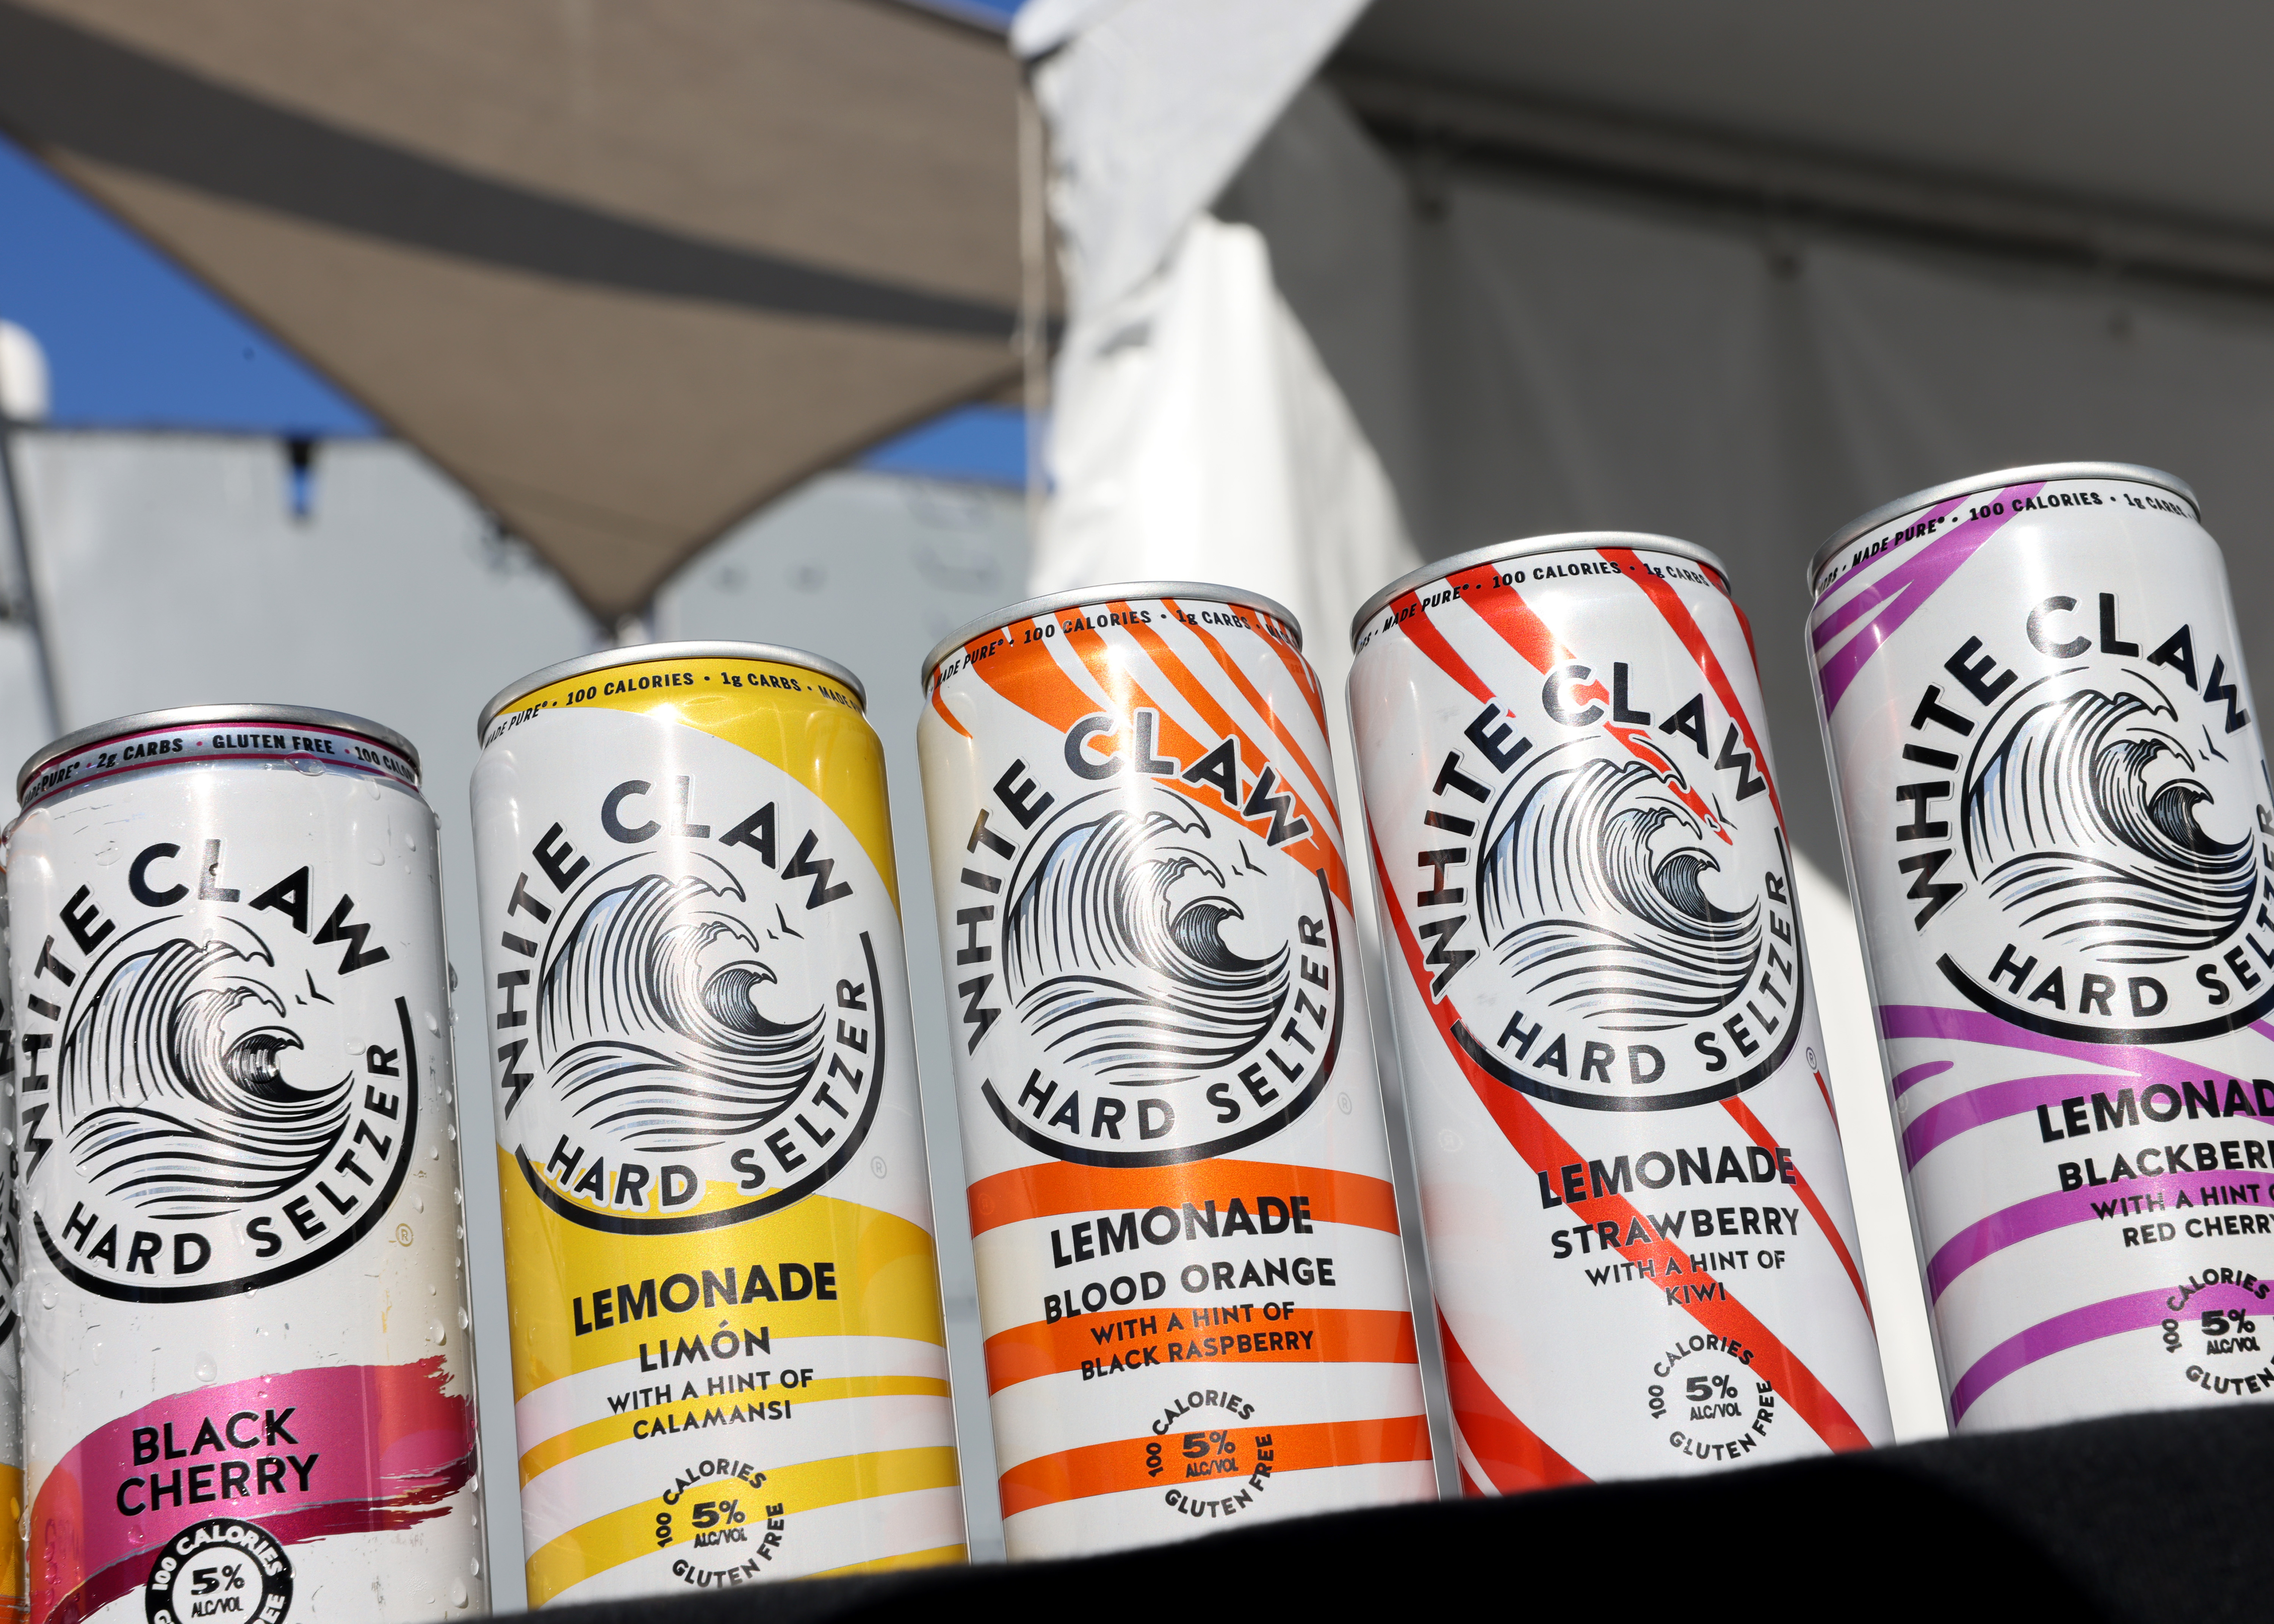 Five cans of the White Claw Hard Seltzer | Source: Getty Images